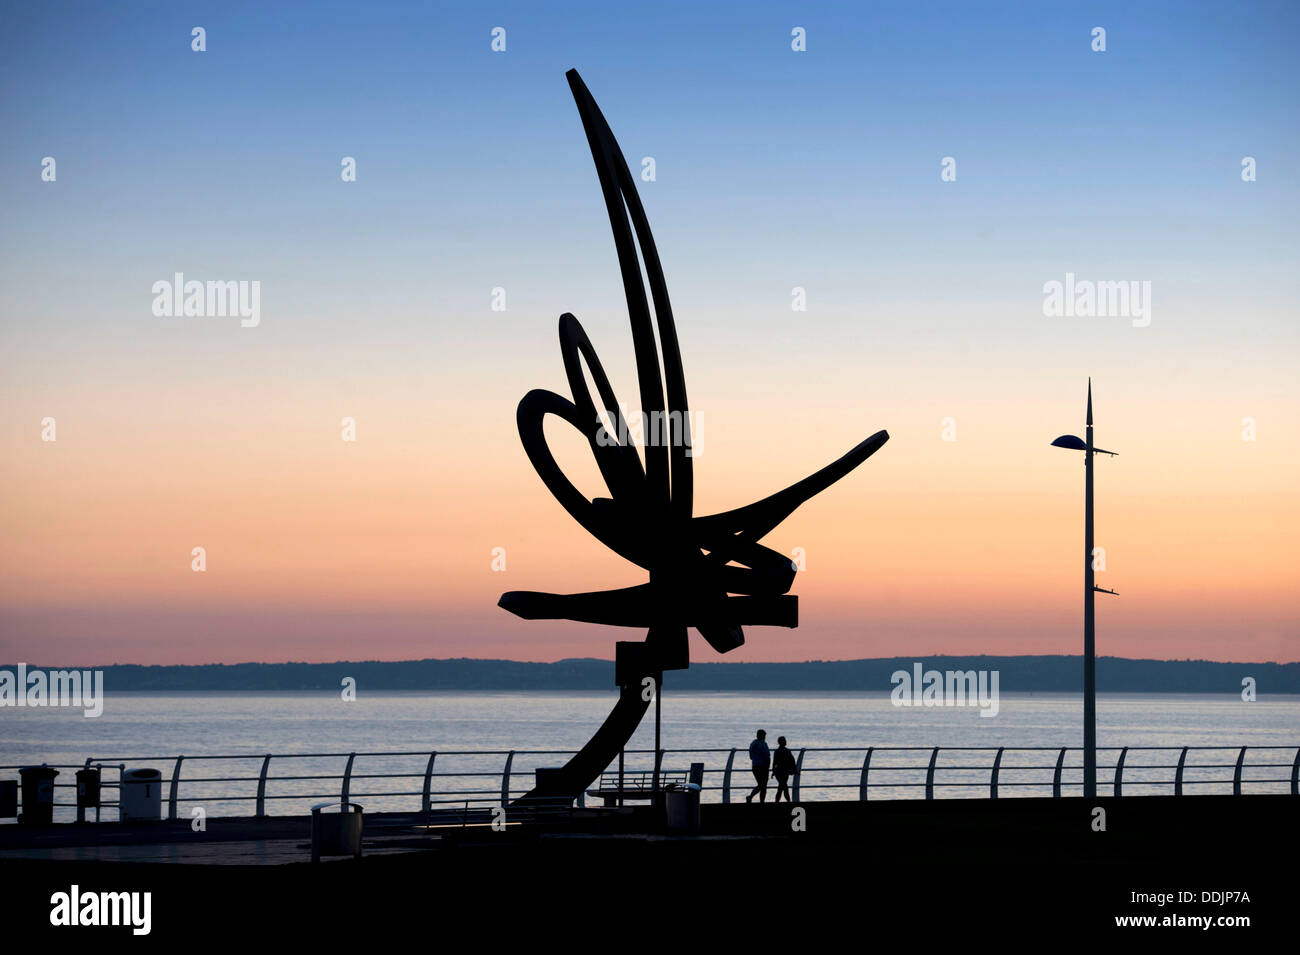 Port Talbot - South Wales - UK - 3rd September 2013 : People walking past the "Kite Trail" sculpture as the sun sets along the seafront at Aberavon Beach near Port Talbot this evening. The Kite Trail sculpture at Aberavon seafront is Wales' largest sculpture standing at 12 metres high and weighing 11 tonnes. It was designed by Carmarthenshire-based artist and sculptor Andrew Rowe and was installed in December 2007. © Phil Rees/Alamy Live News Stock Photo